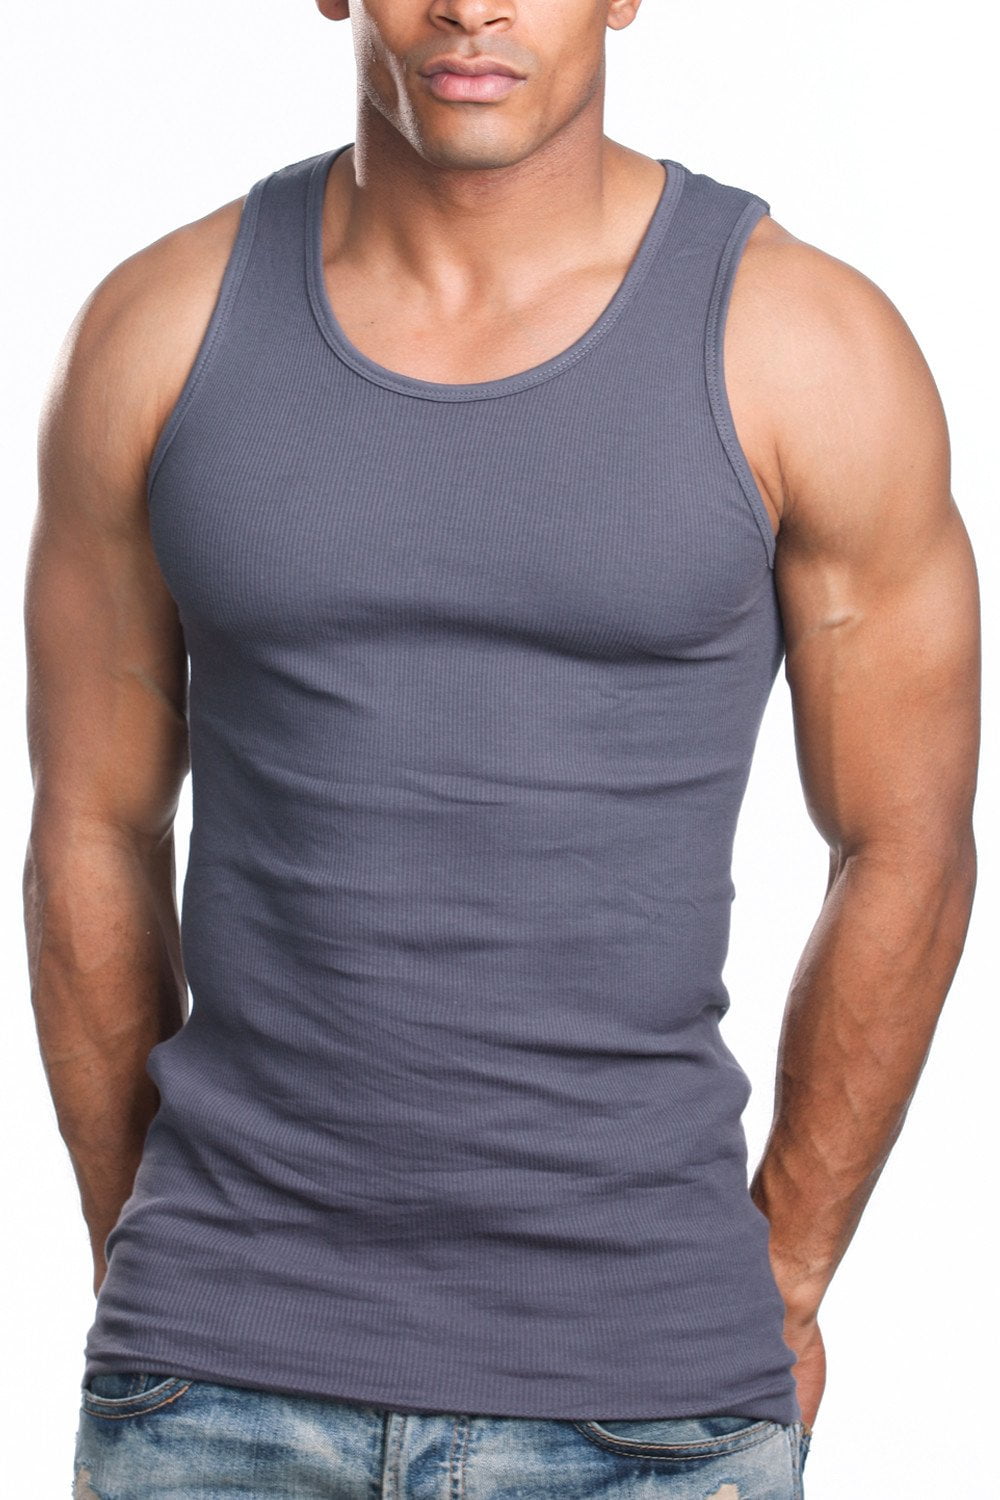 S-XXXL Mens vest black and grey tank top men with fine rib pack of 4 breathable thanks to 100% cotton . in white smooth